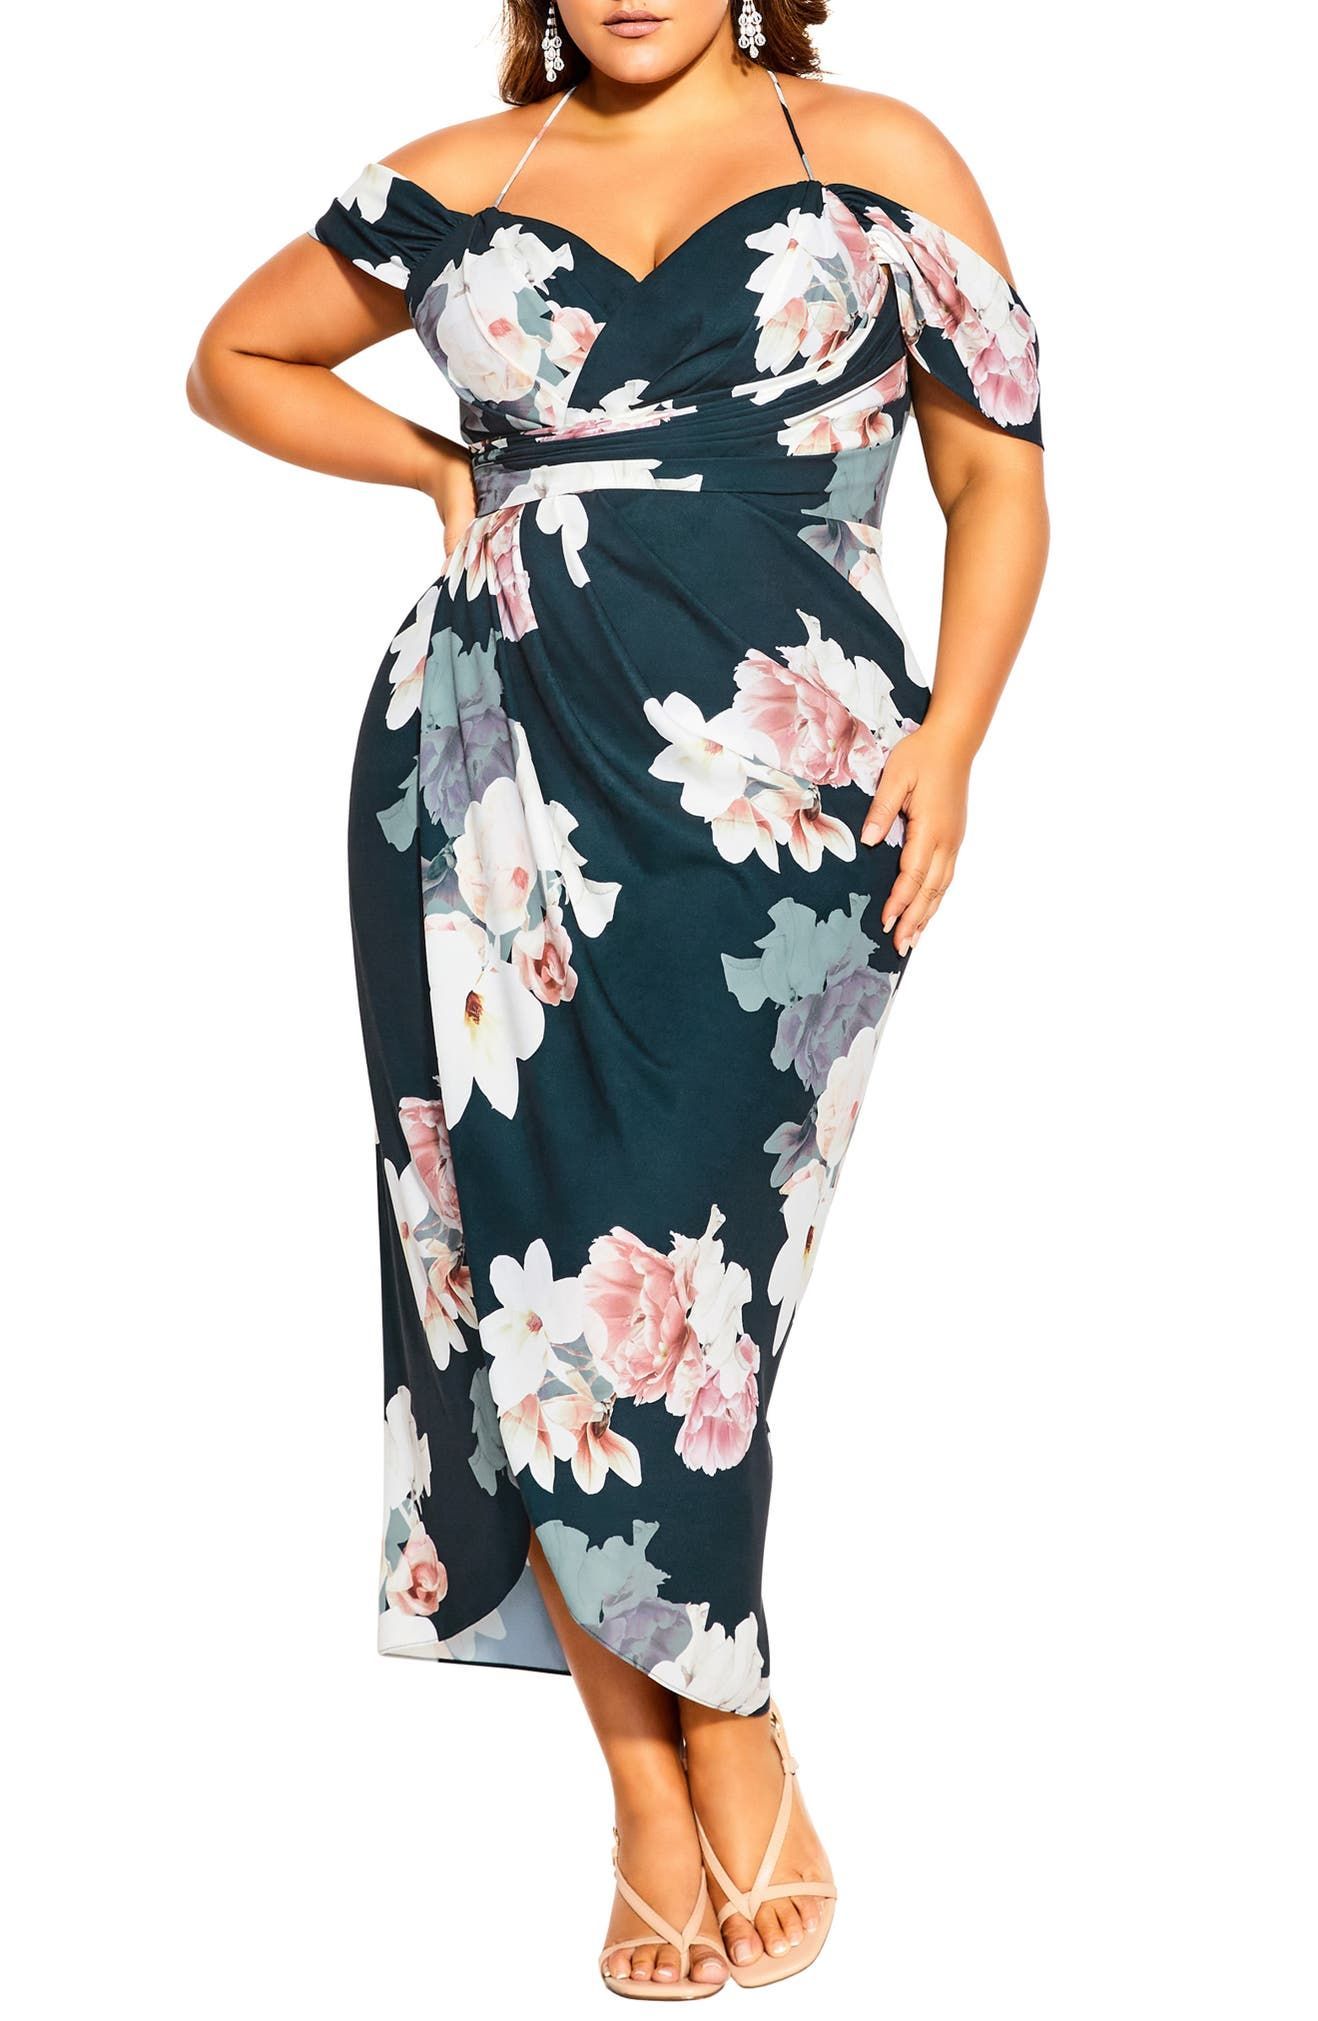 plus size dresses to wear to weddings as a guest